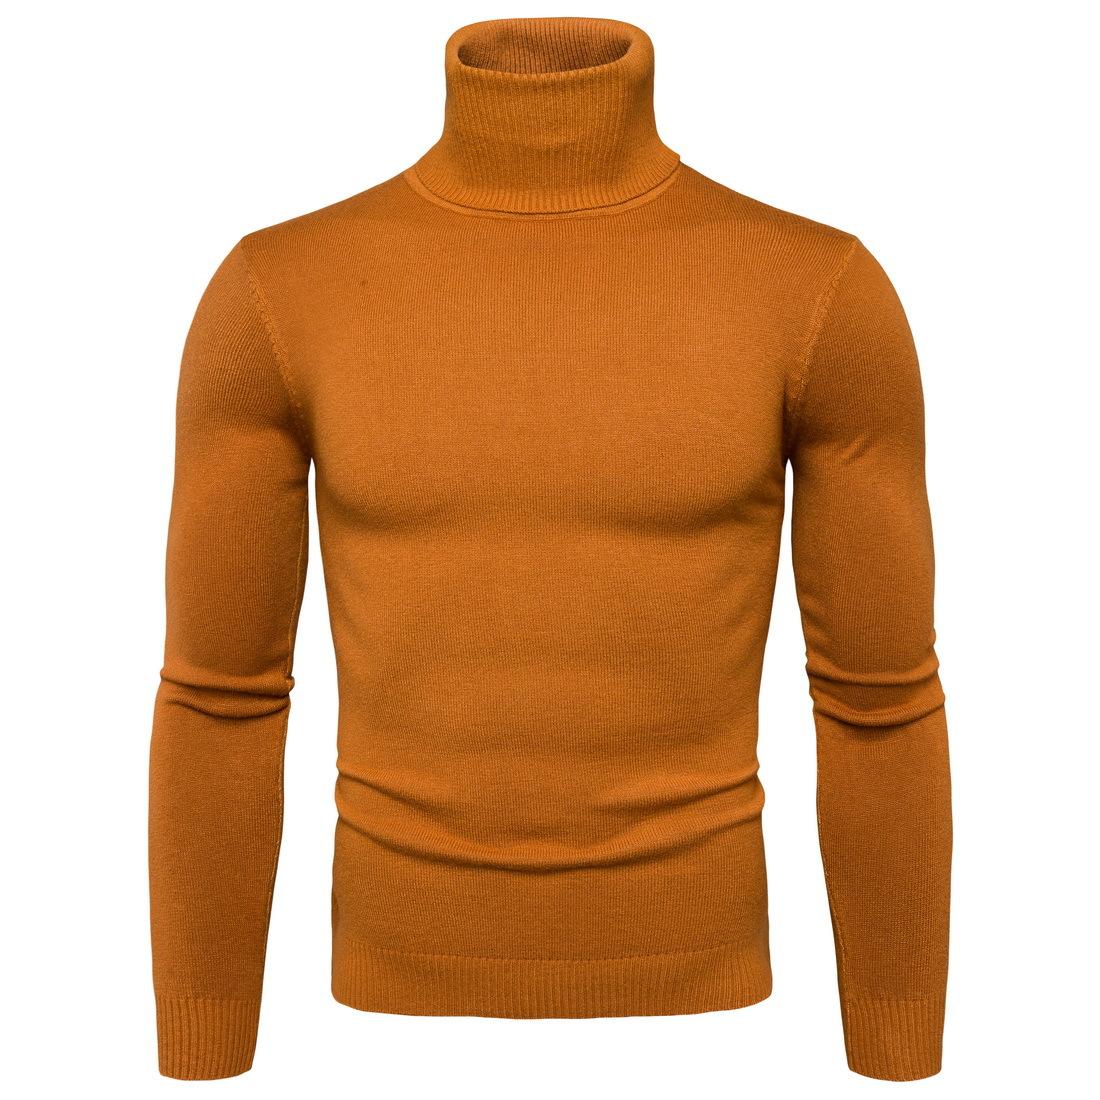 Best men's cardigans sweaters | Cardigans and Sweaters | Nepali ...